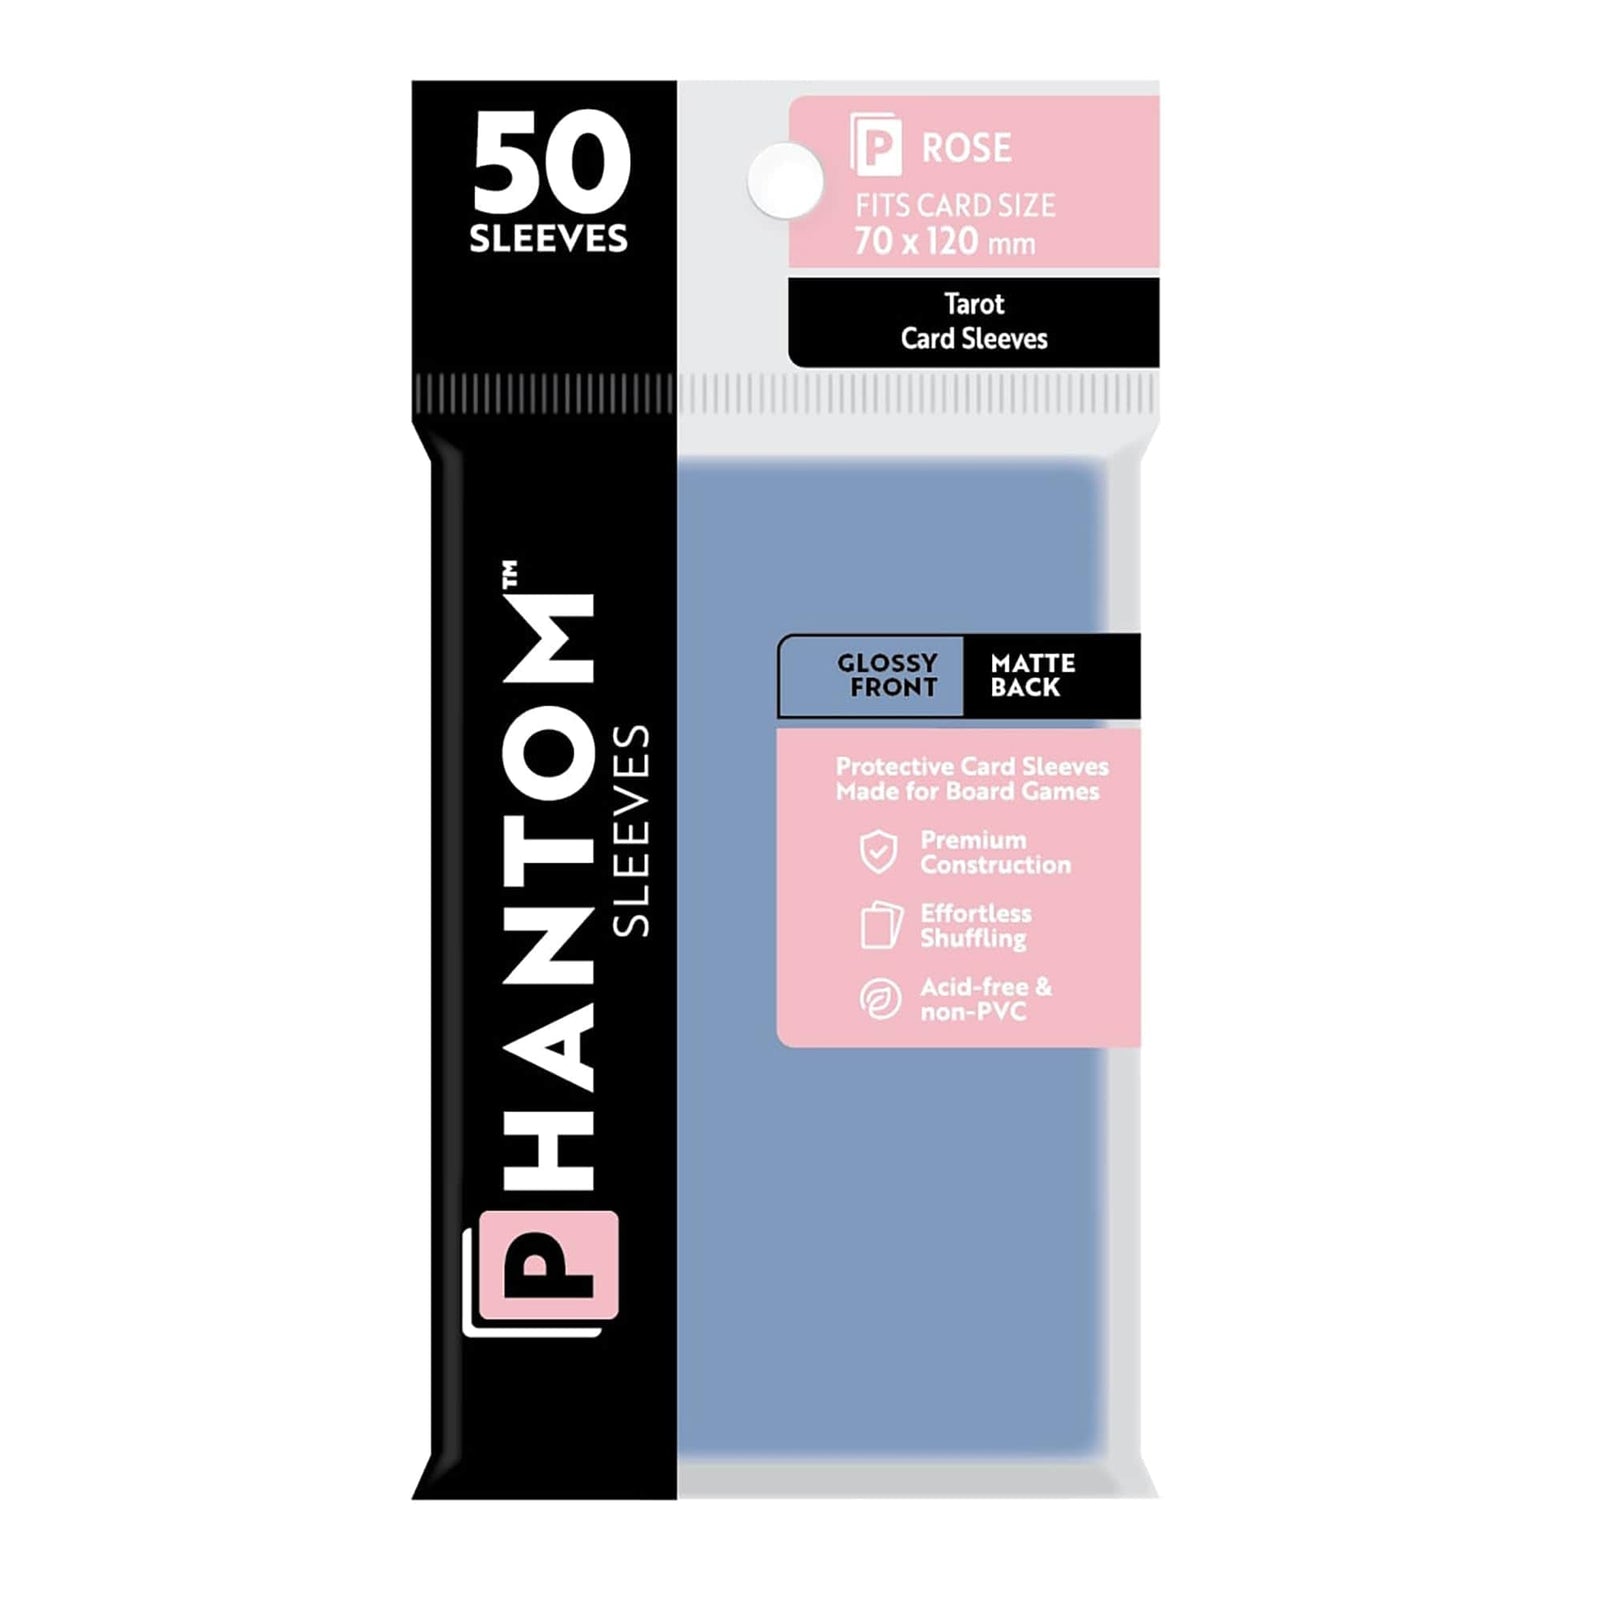 """Phantom Sleeves: """"Rose Size"""" (70mm x 120mm) - Gloss/Matte (50)""" - Lost City Toys